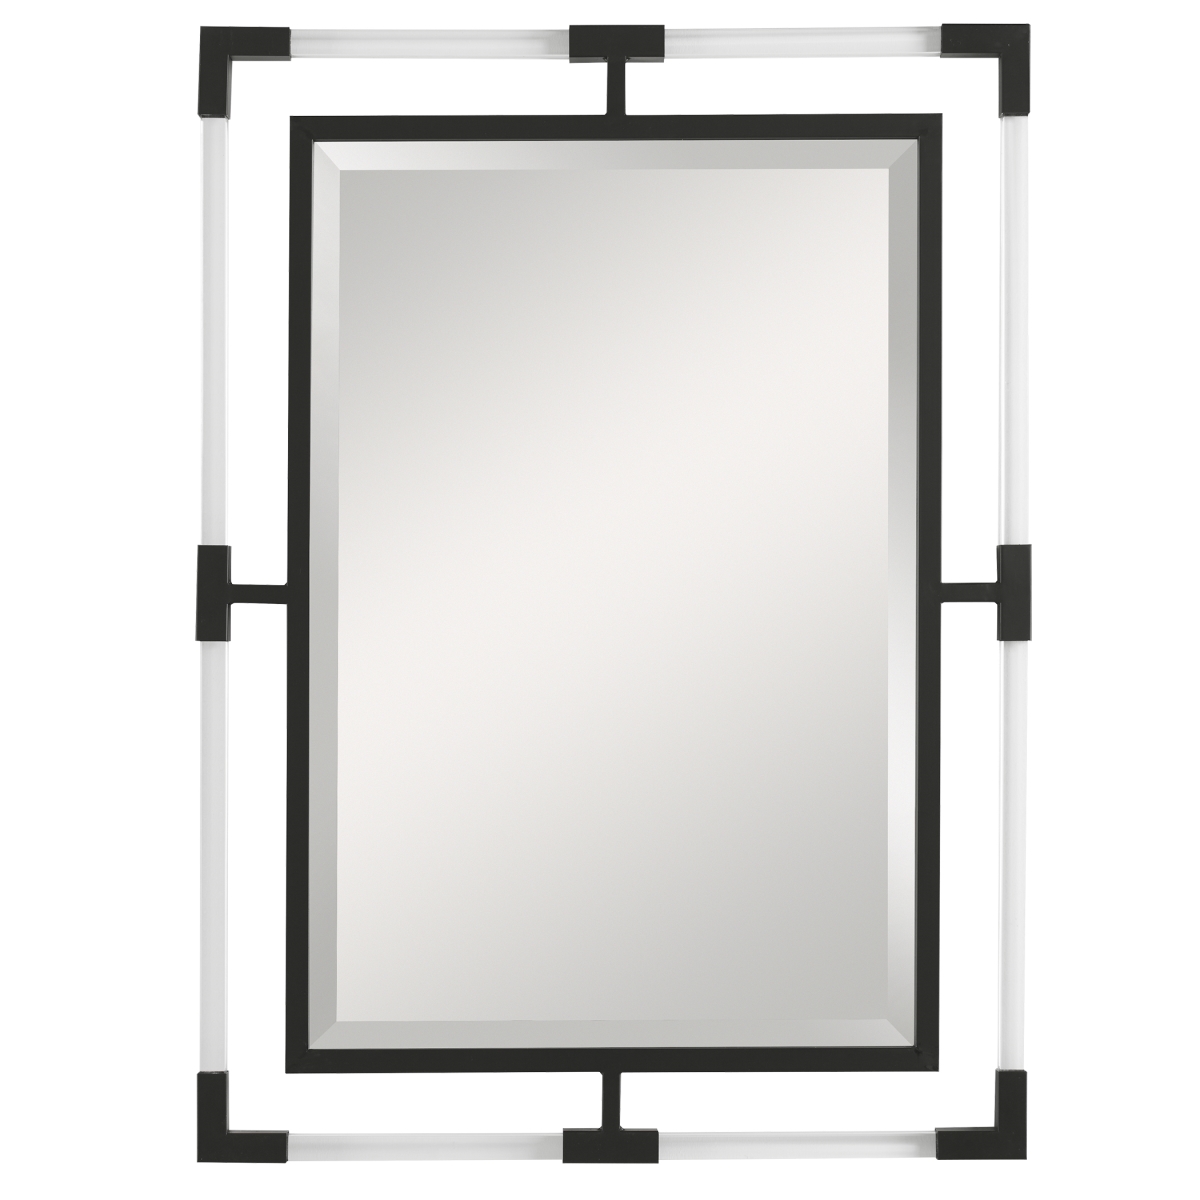 Picture of 212 Main 09713 1 x 28 x 38 in. Balkan Wall Mirror  Black